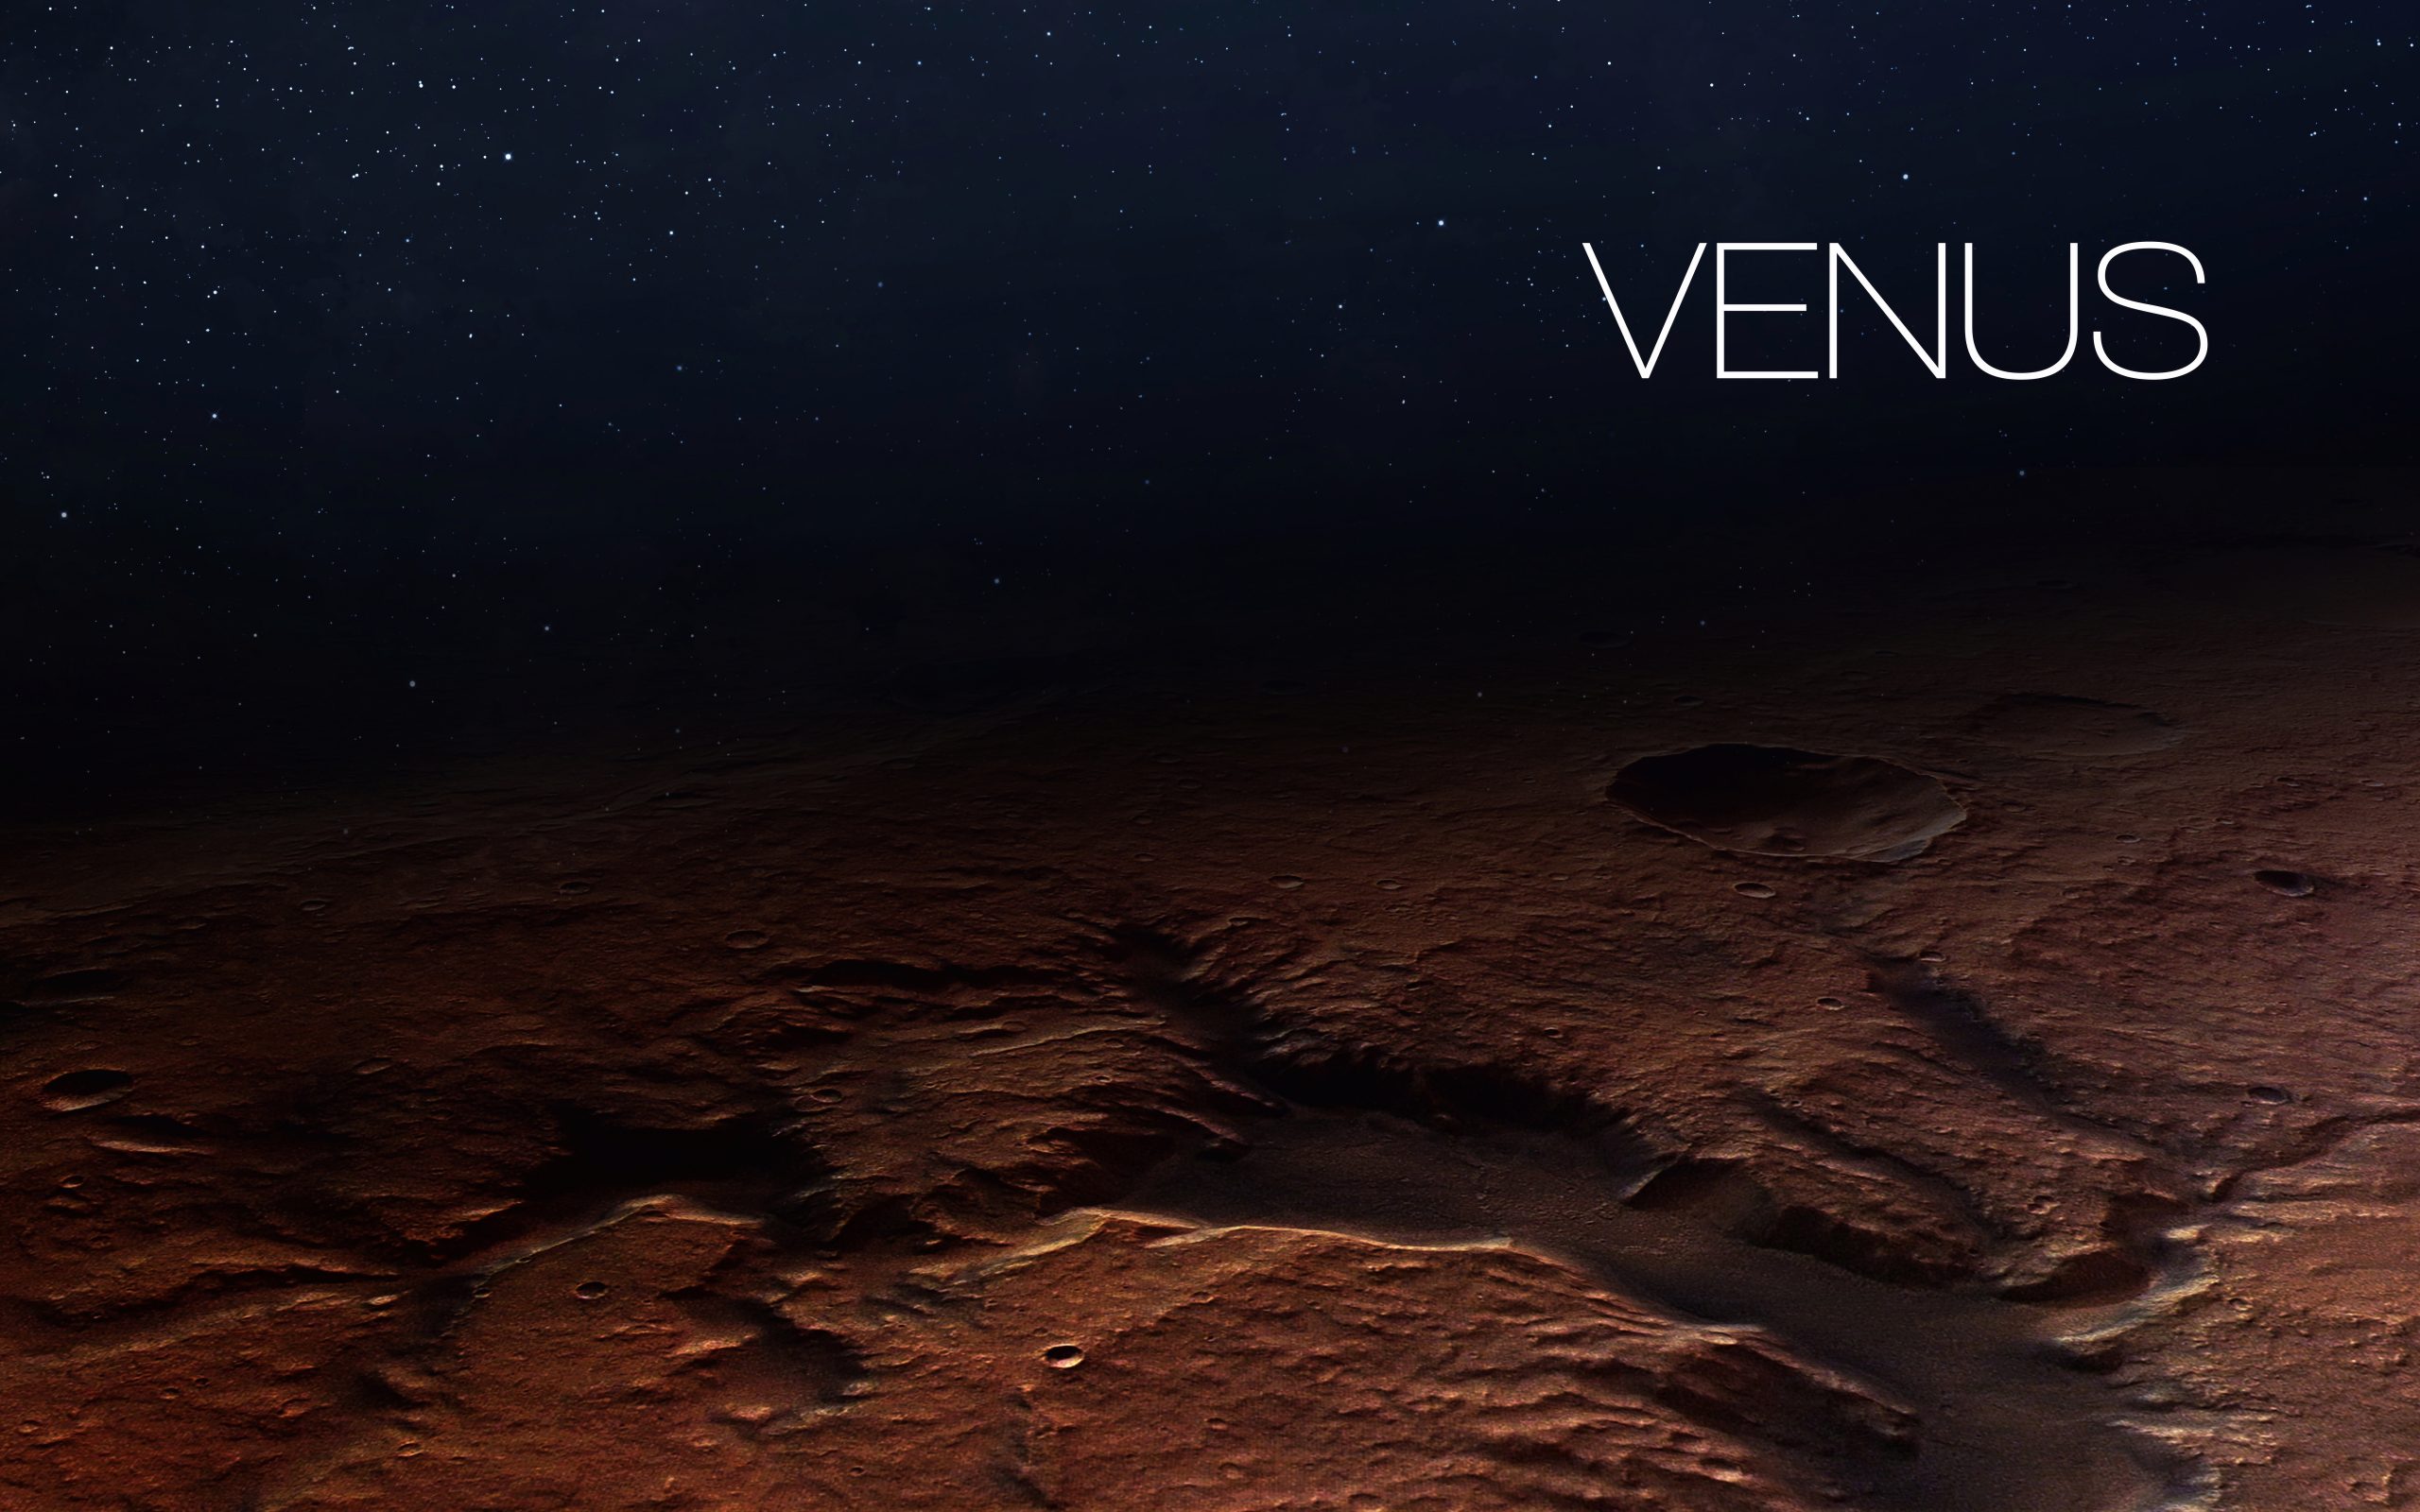 Venus - High resolution image with elements furnished by NASA. Depositphotos.